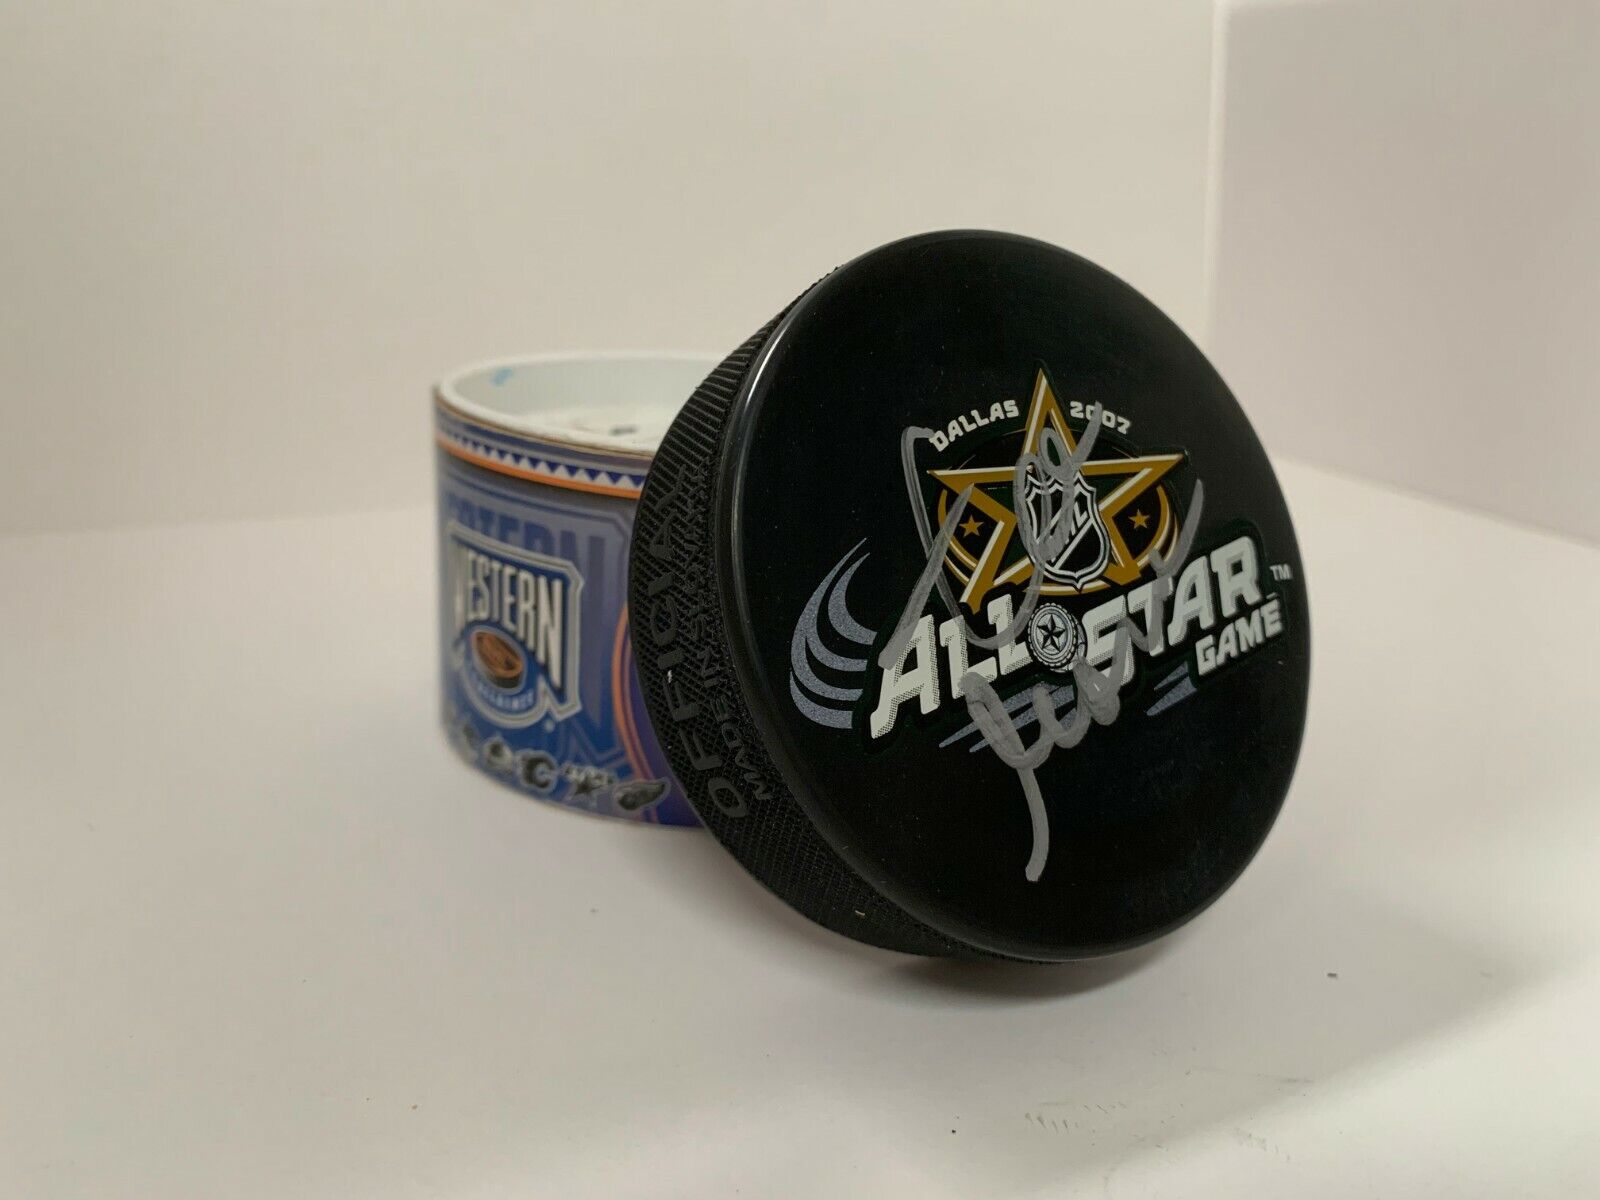 Zdeno Chara Autographed Signed 2007 All Star Game Hockey Puck PSA AI16748